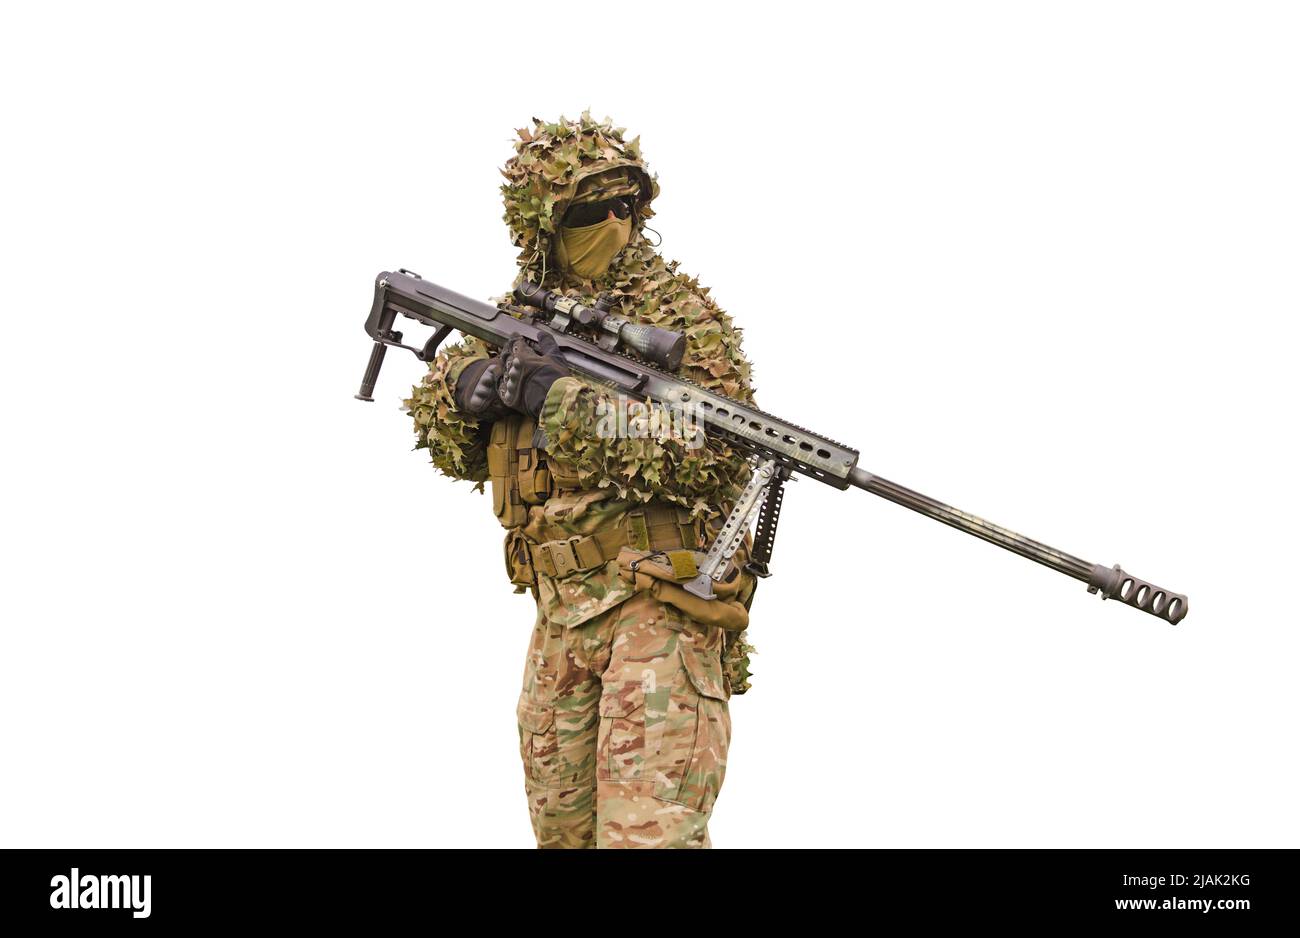 Sniper with sniper rifle, isolated on white background. Stock Photo